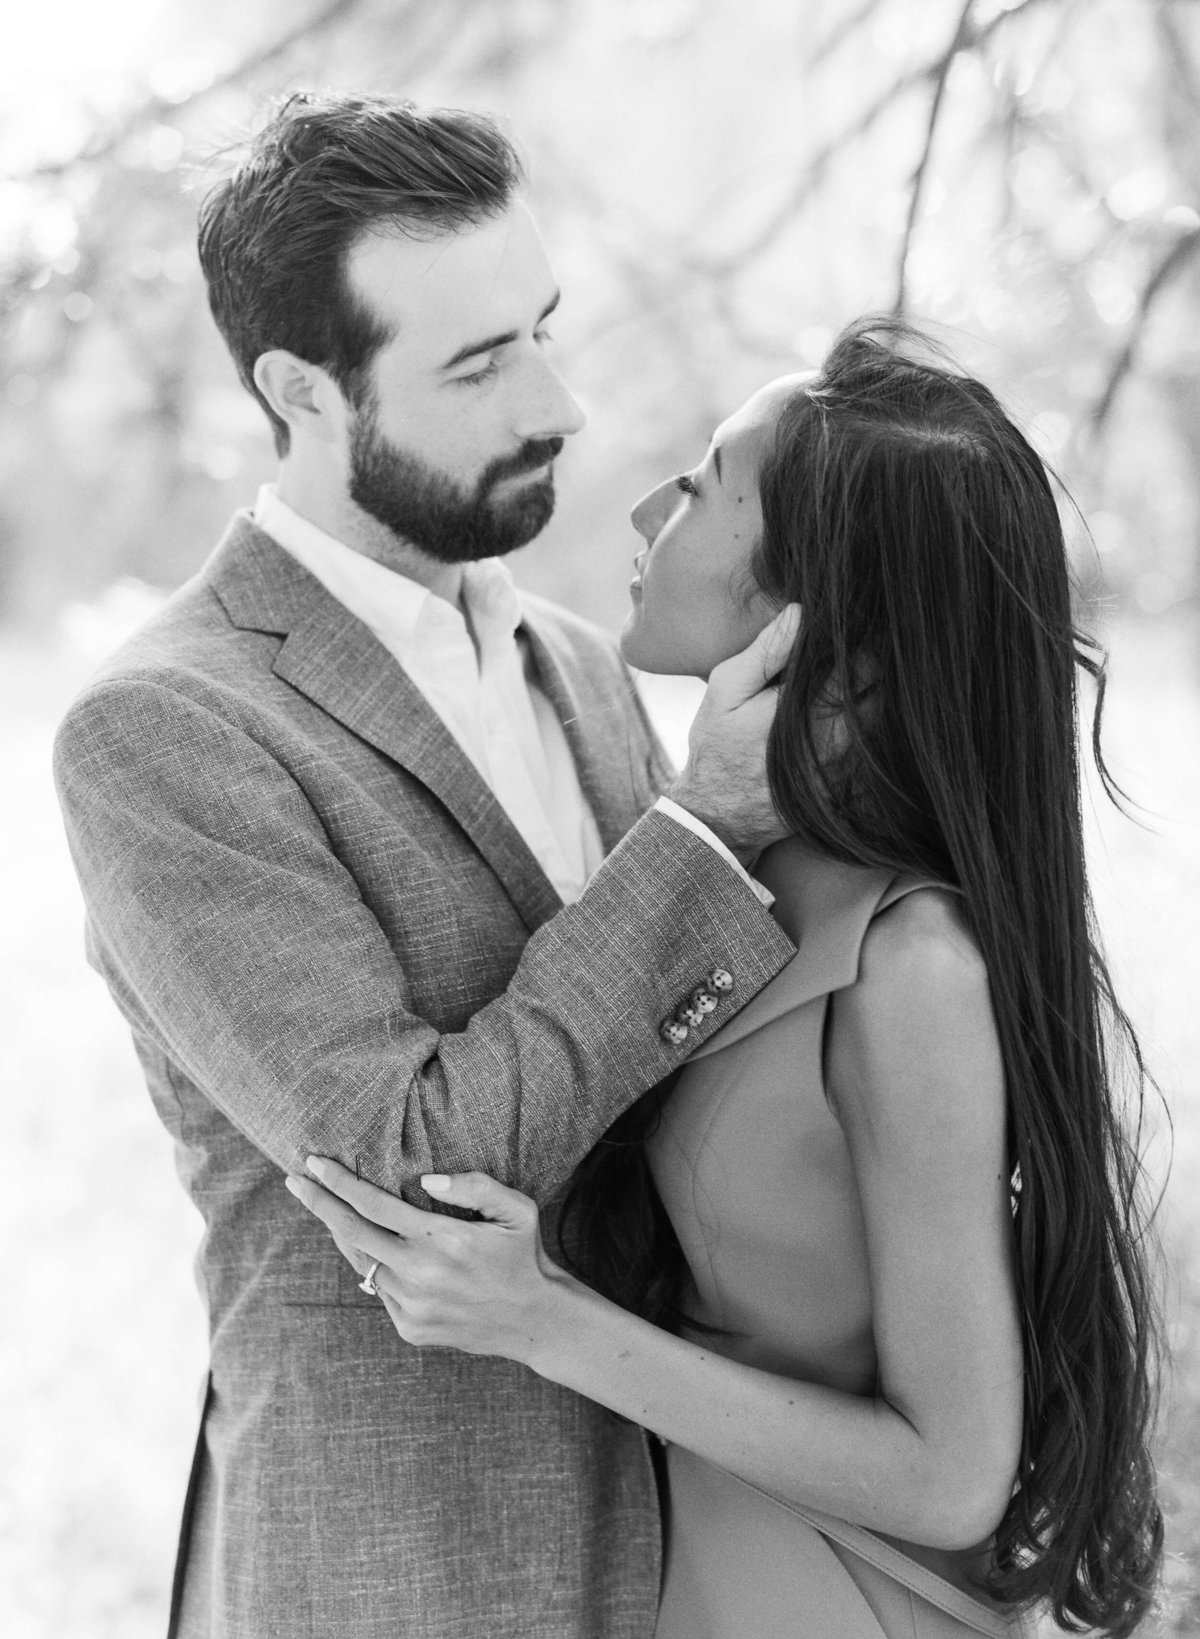 54-KTMerry-engagement-photography-film-black-white